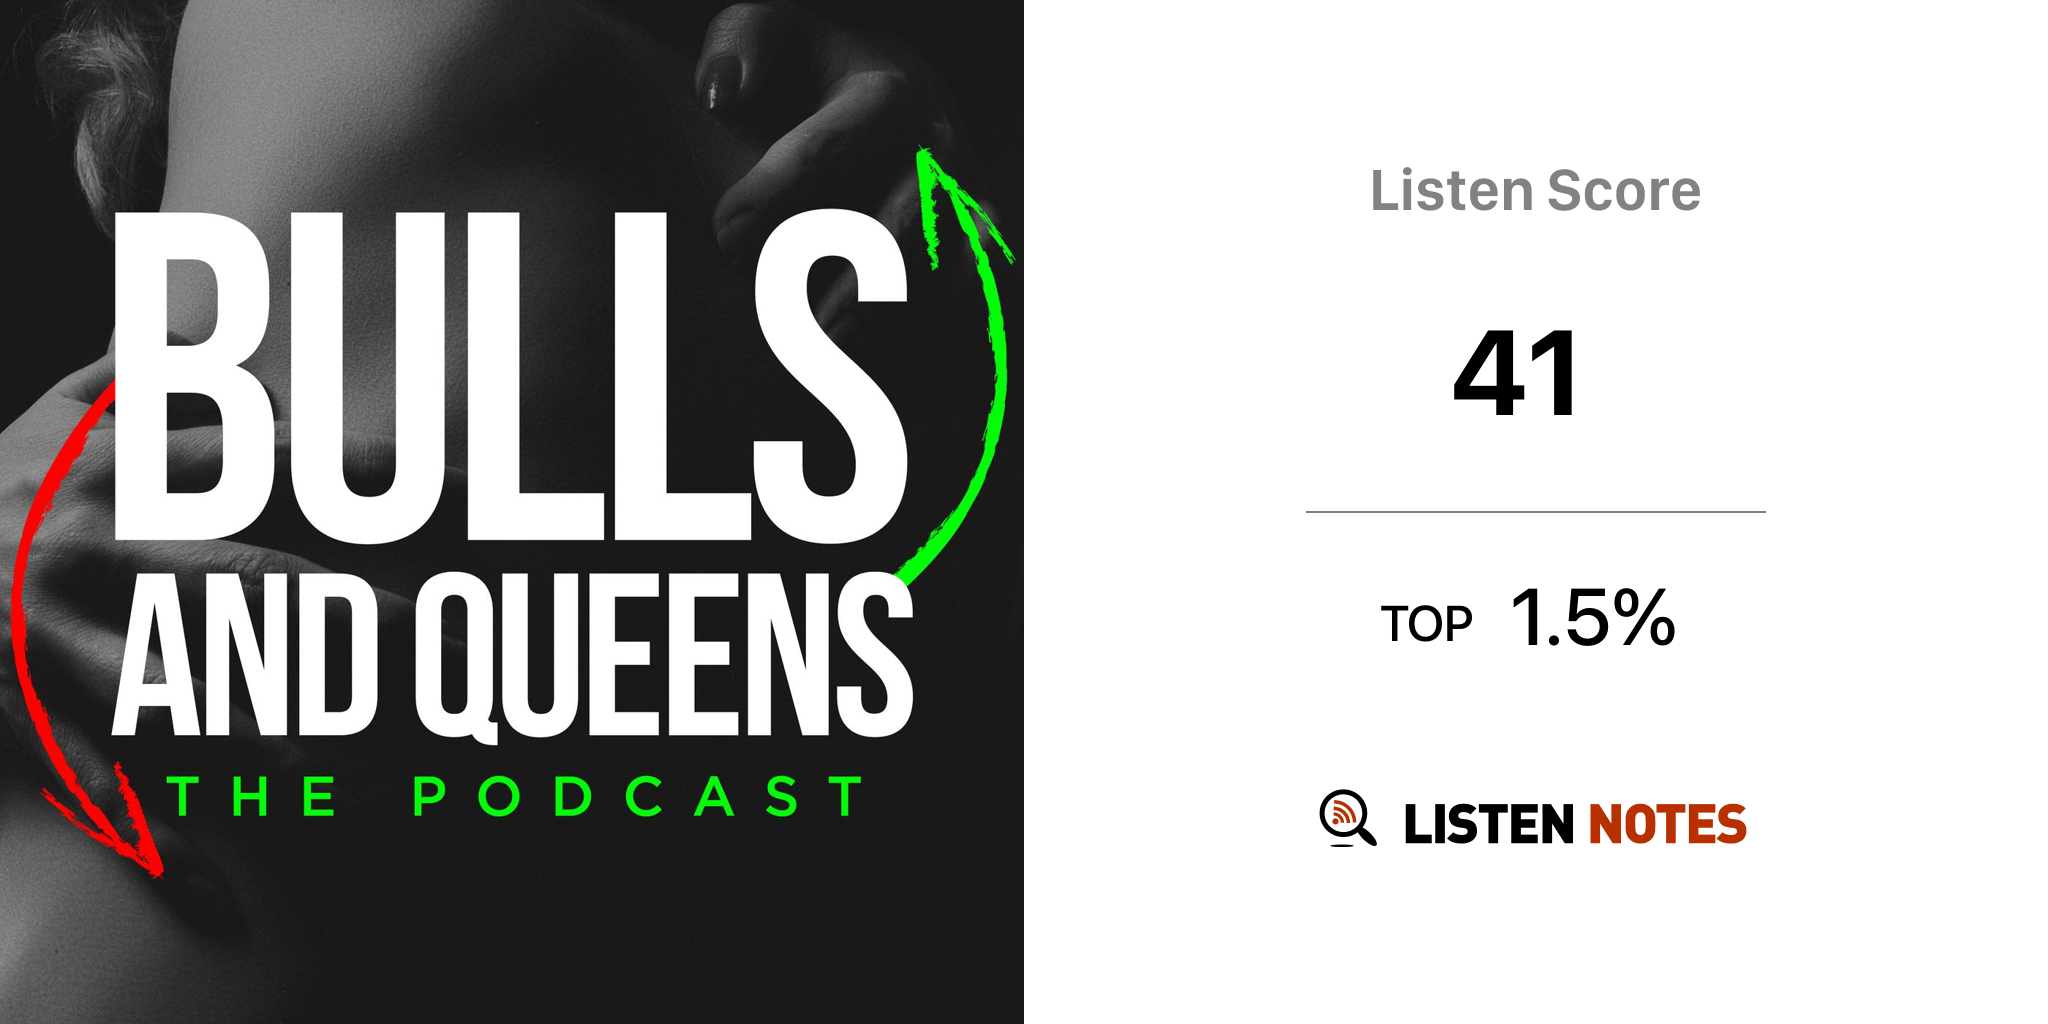 Bulls and Queens Swinger Podcast for Cuckolds Hotwives and Bulls Listen Notes pic